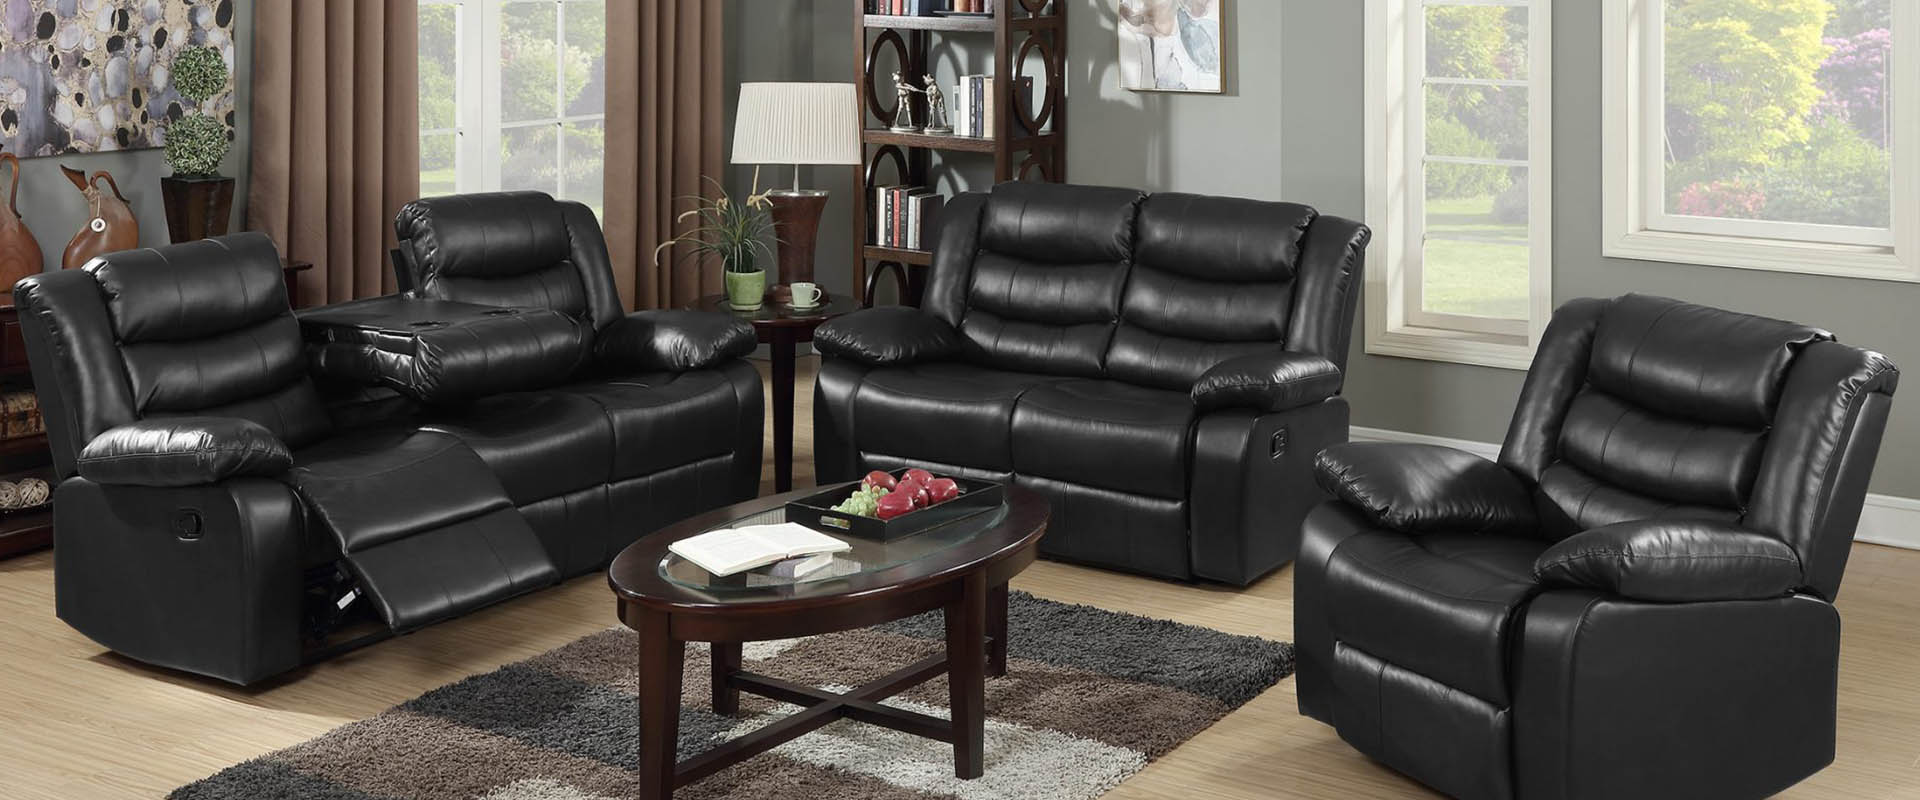 Home Express Furniture | We are your trusted choice for affordable